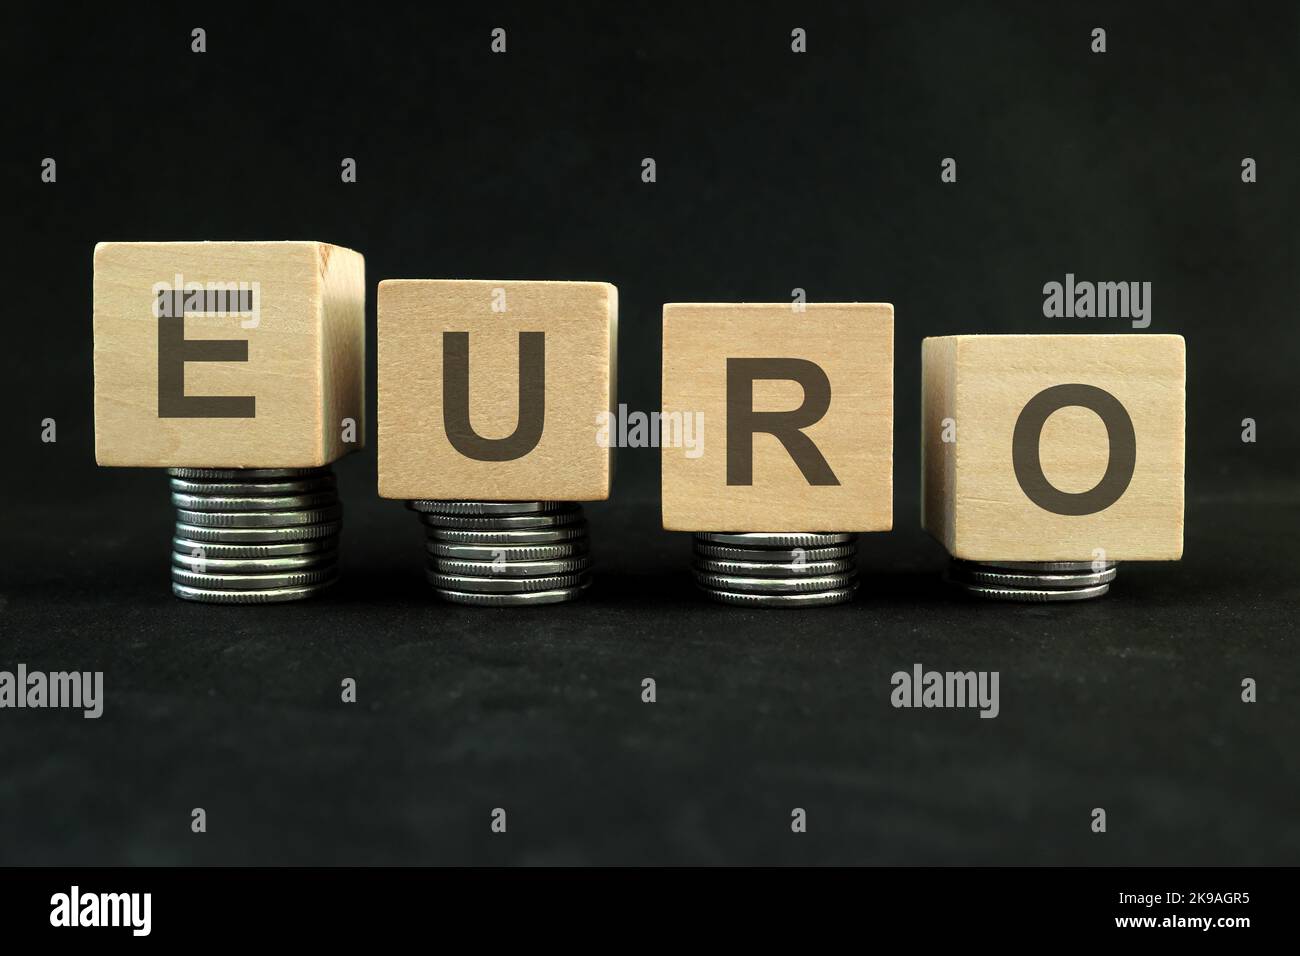 Euro currency weakening, value depreciation and devaluation concept. Decreasing stack of coins on dark black background. Stock Photo